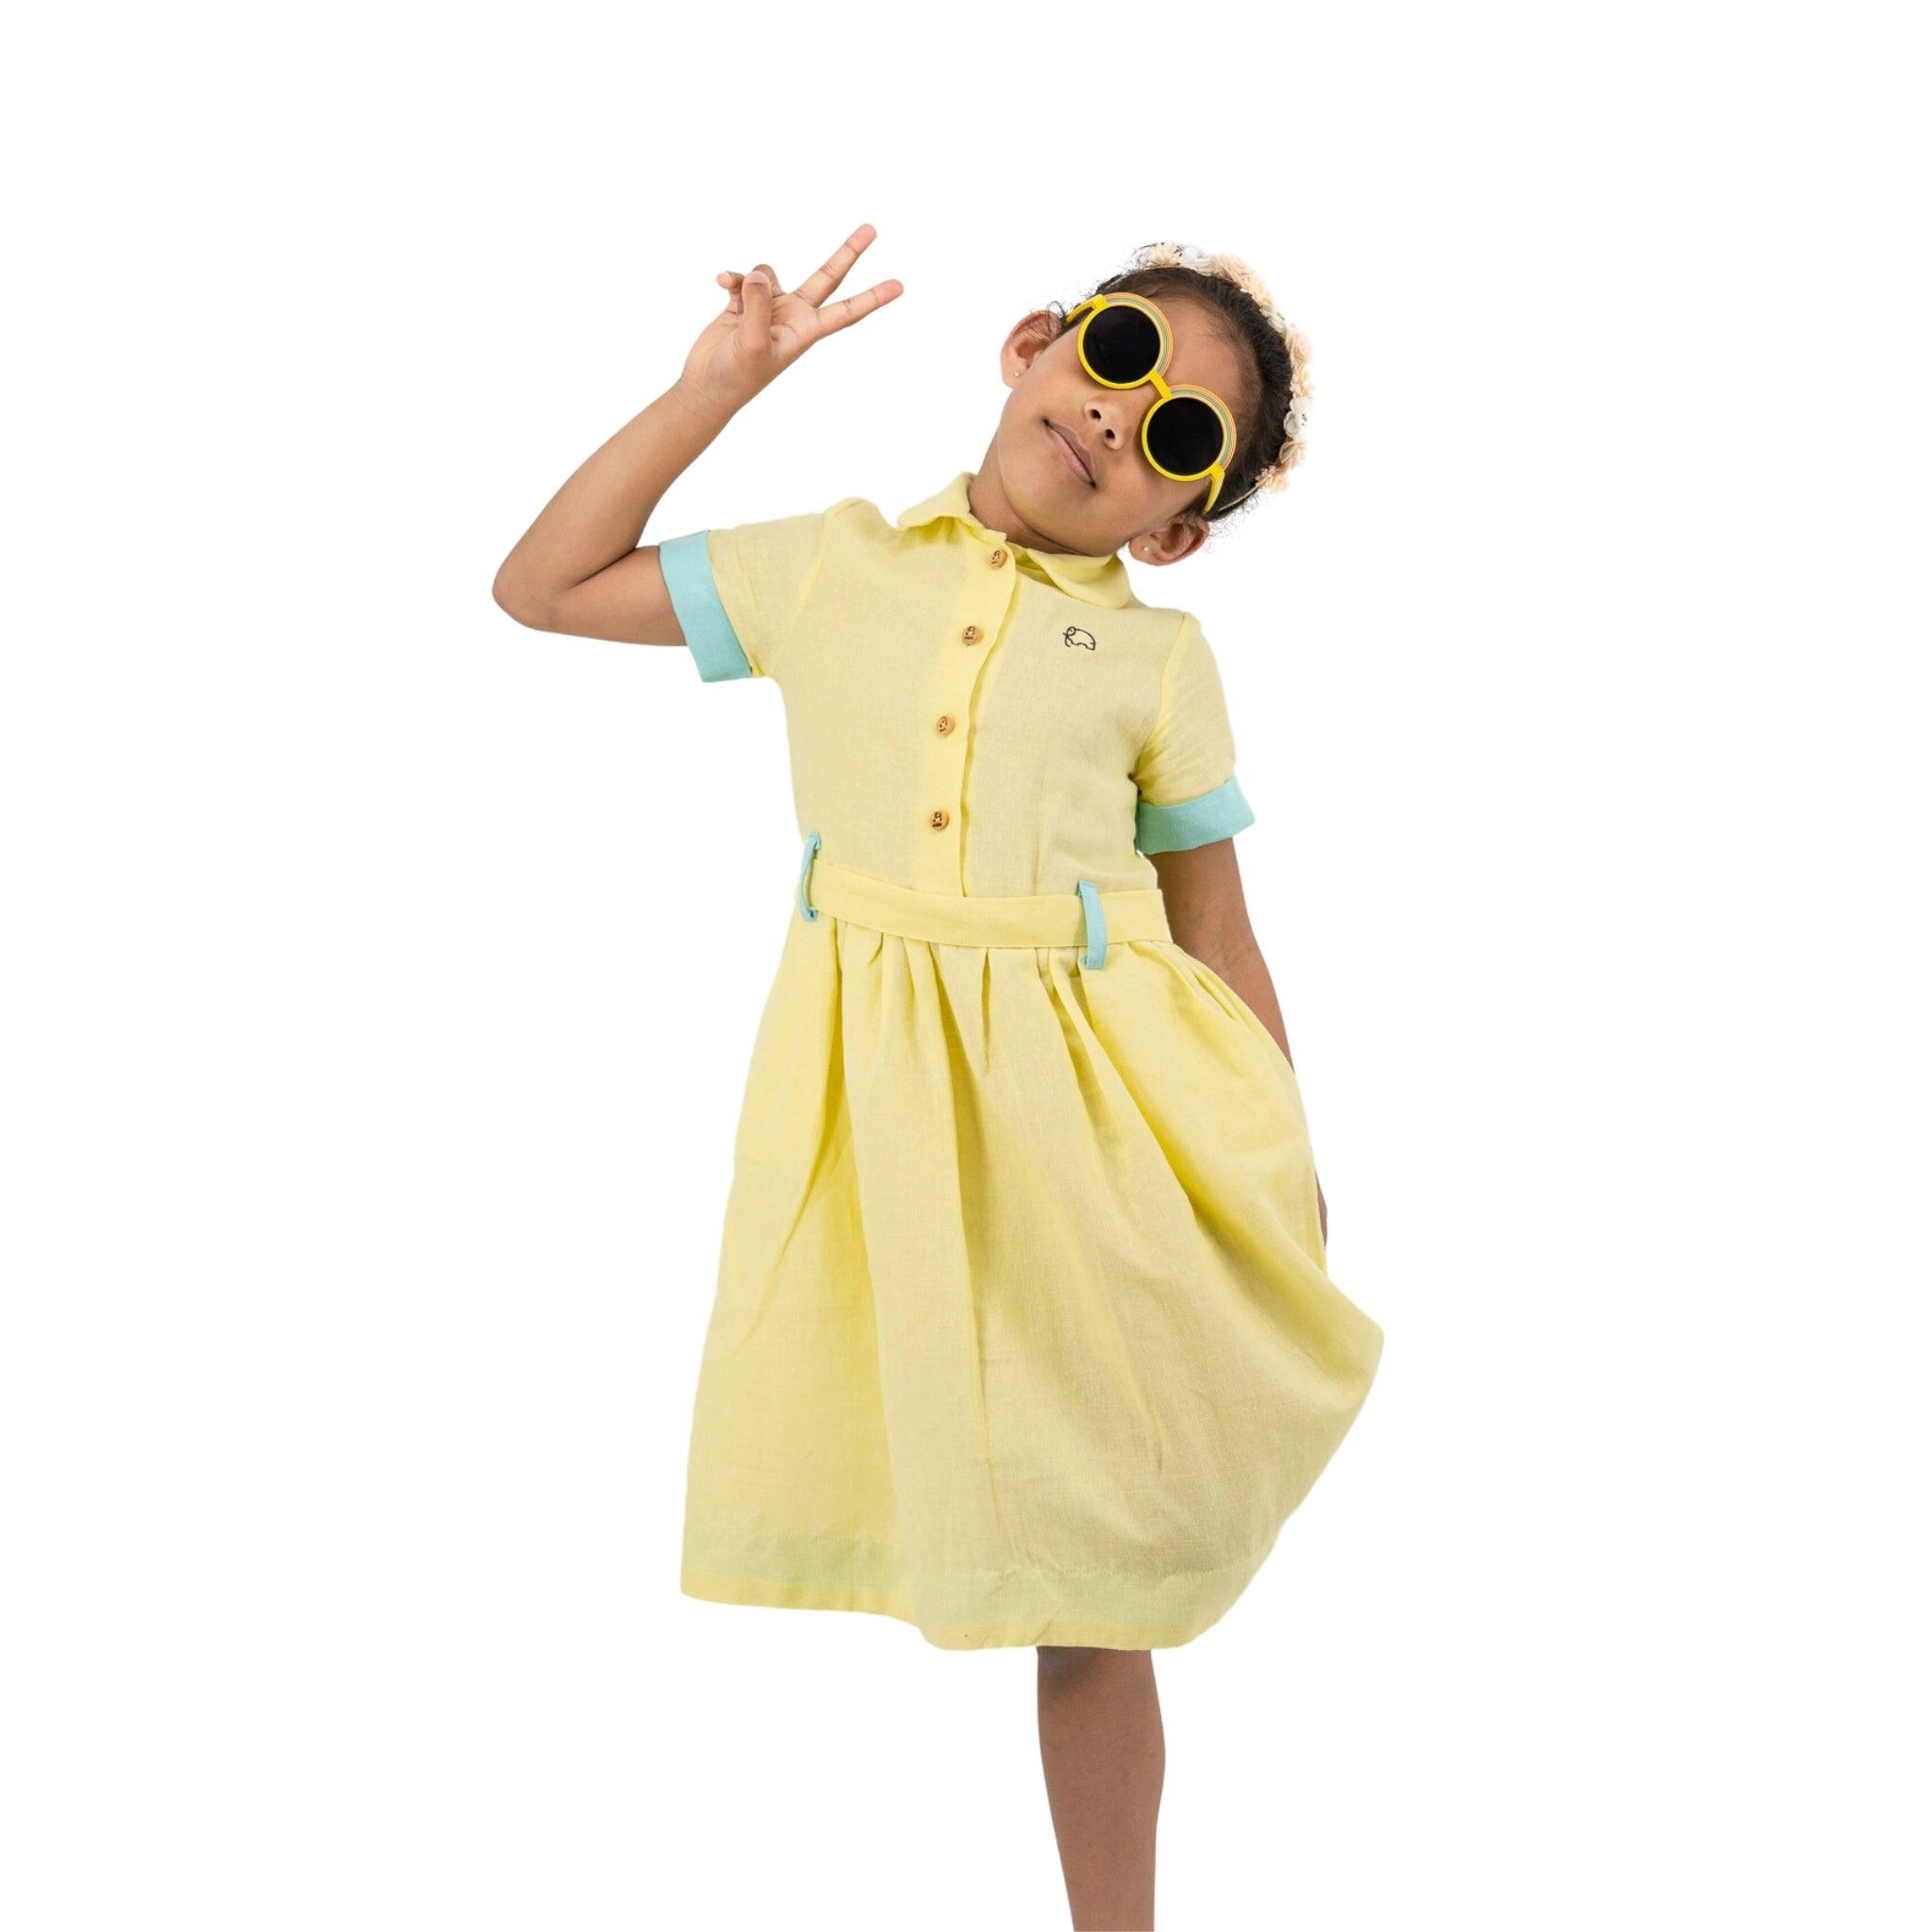 A young girl in a Karee Elfin Yellow Linen Below Knee Length Dress for Girls and sunglasses gives a peace sign, standing against a white background.